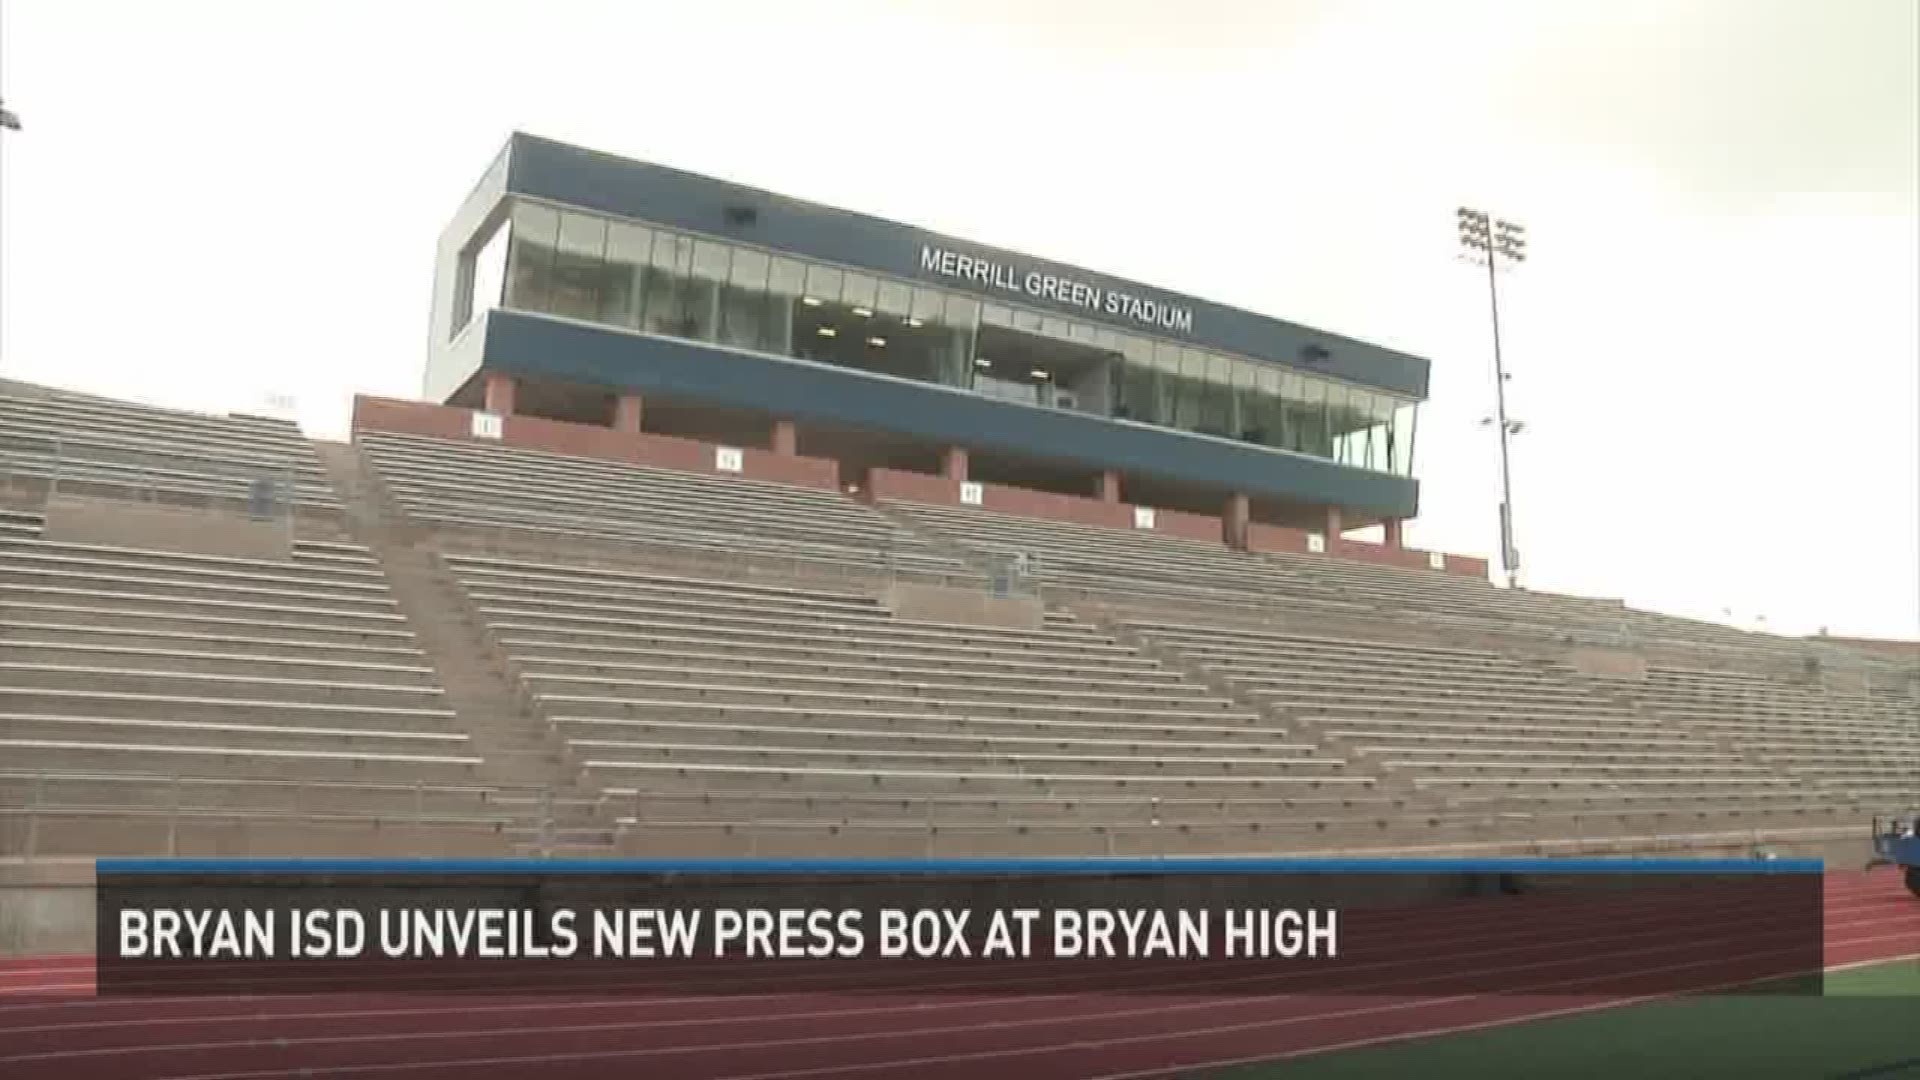 Bryan ISD held an open house to let the public see the new press box and Merrill Green Stadium.